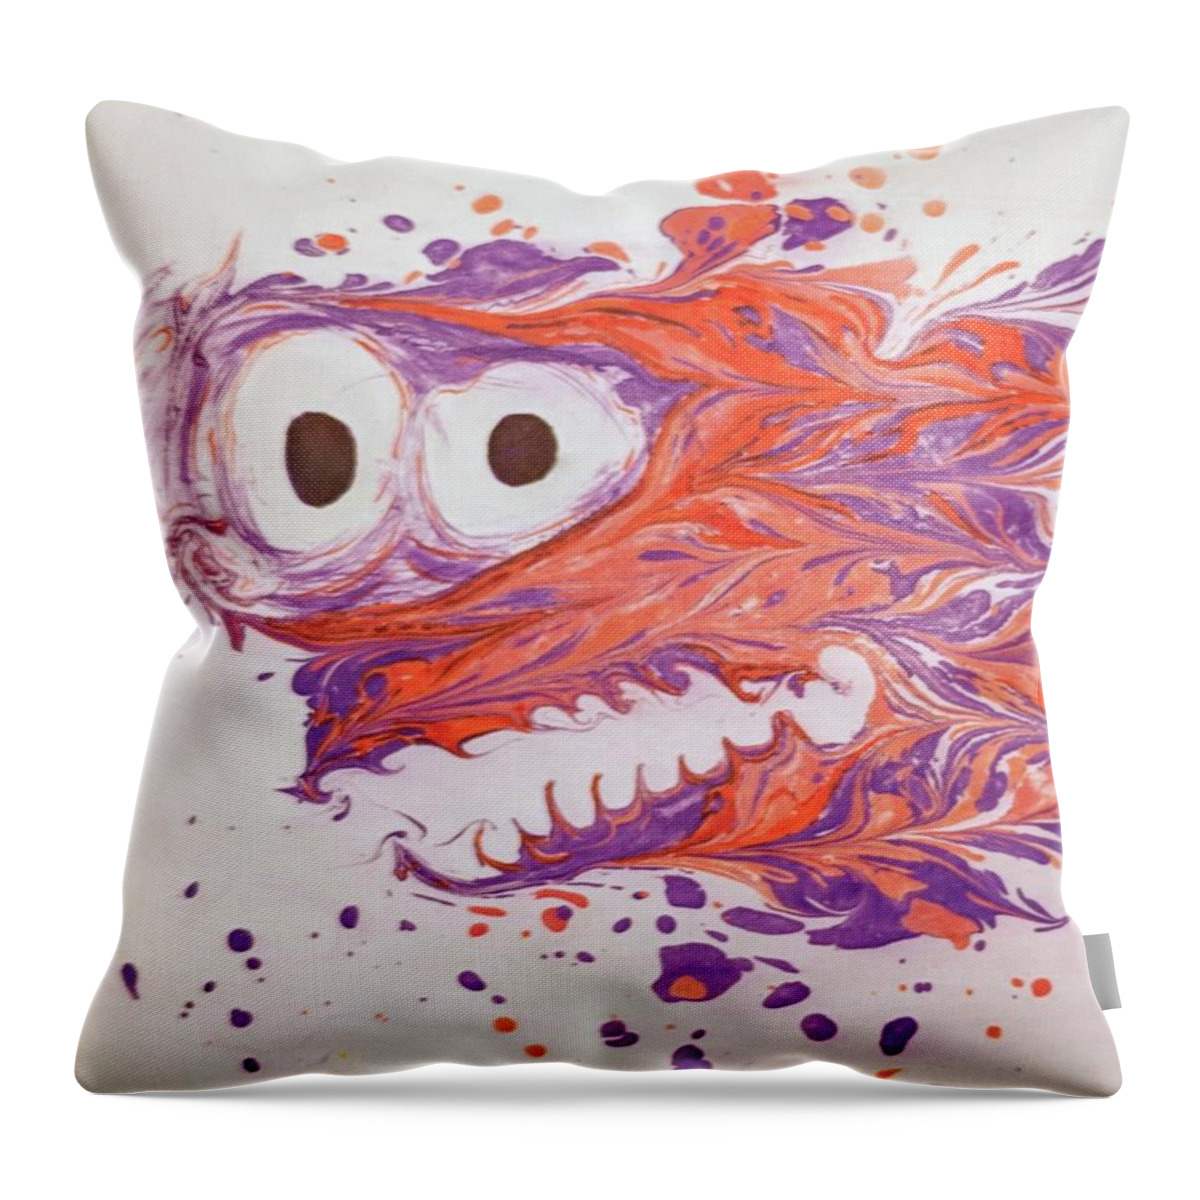 Empathy Throw Pillow featuring the painting Horace on the Night Shift by Misty Morehead